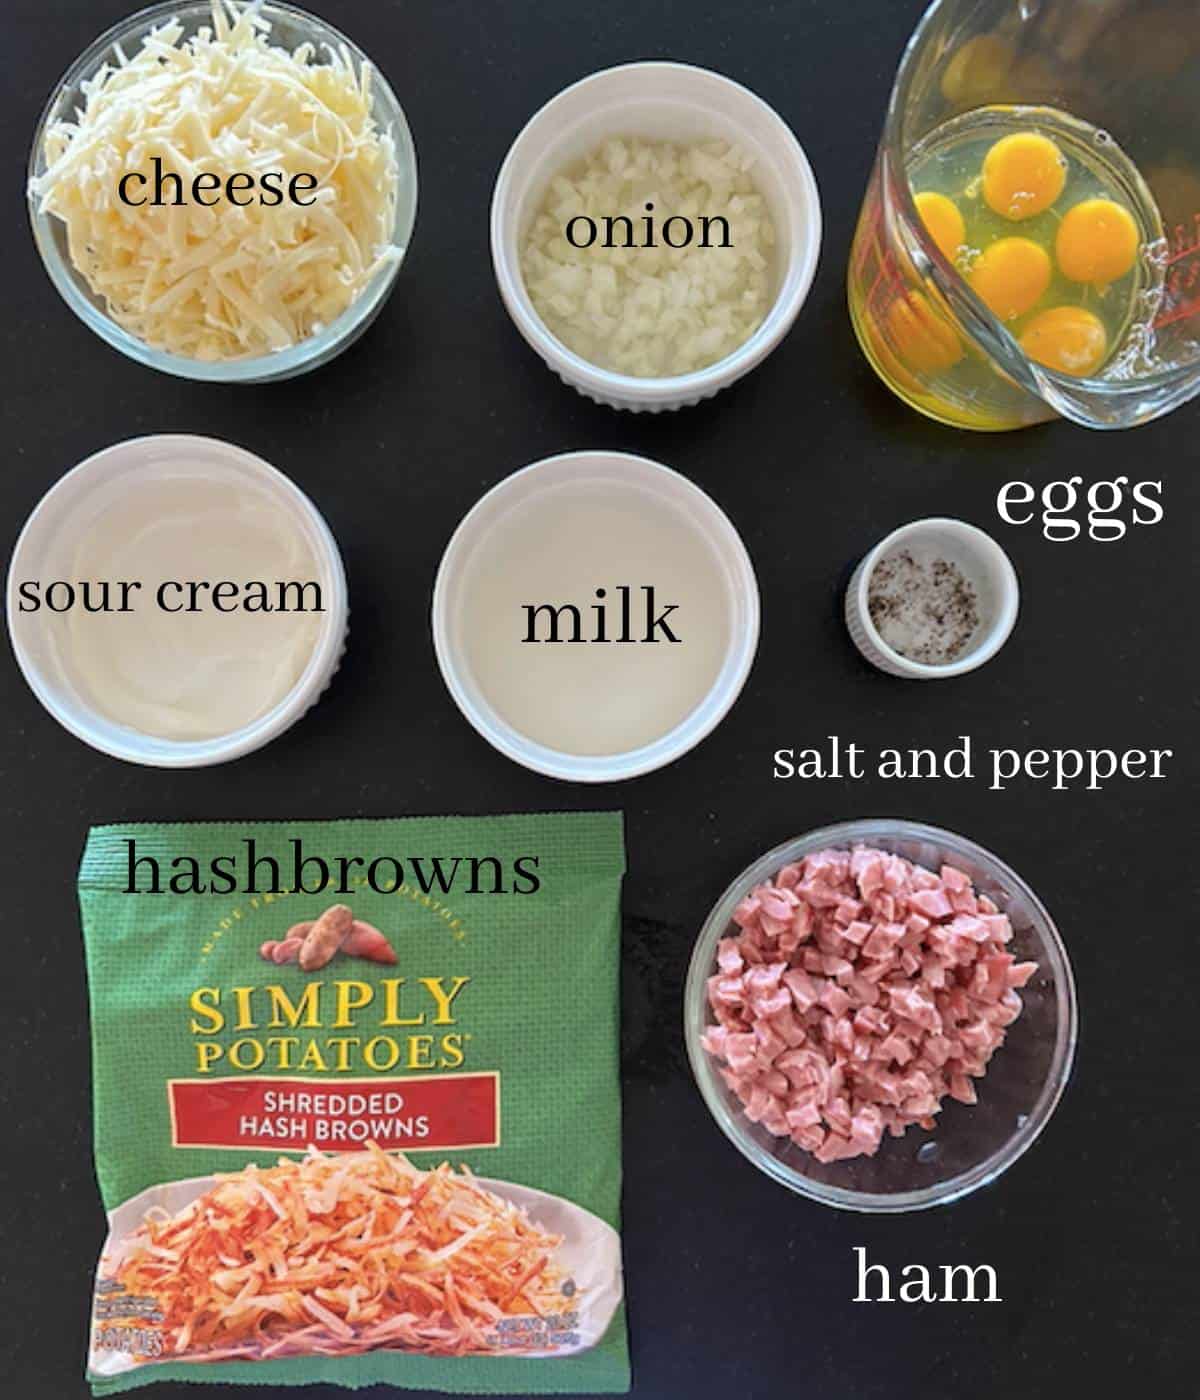 Ingredients for ham and hashbrown egg bake.